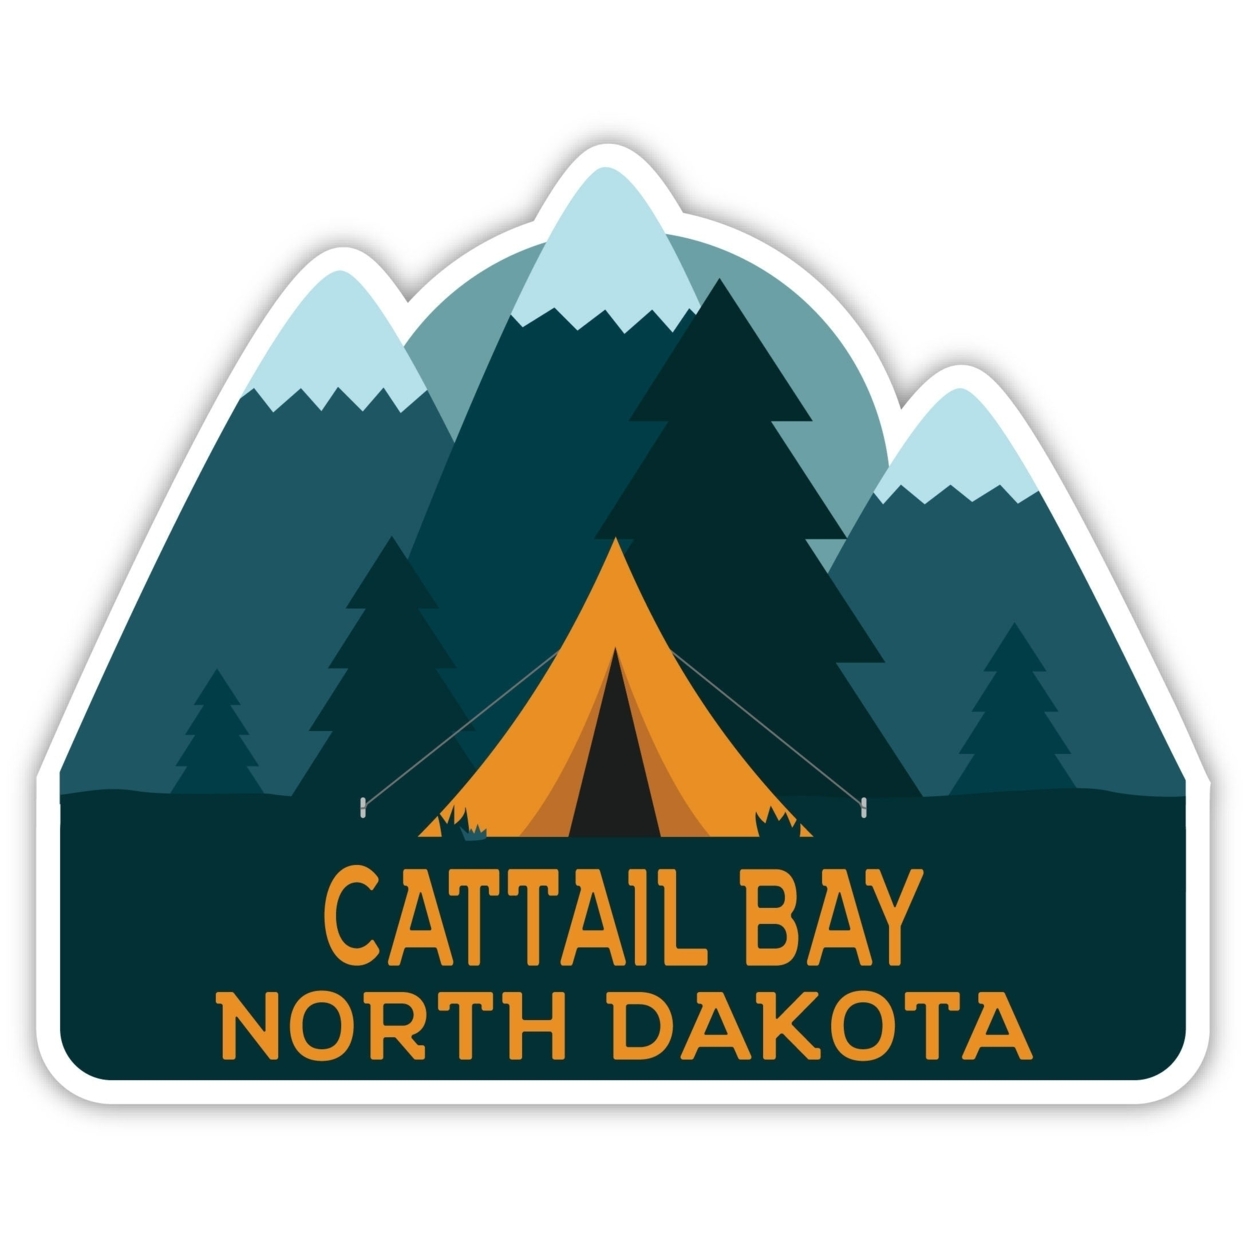 Cattail Bay North Dakota Souvenir Decorative Stickers (Choose Theme And Size) - 4-Pack, 6-Inch, Tent